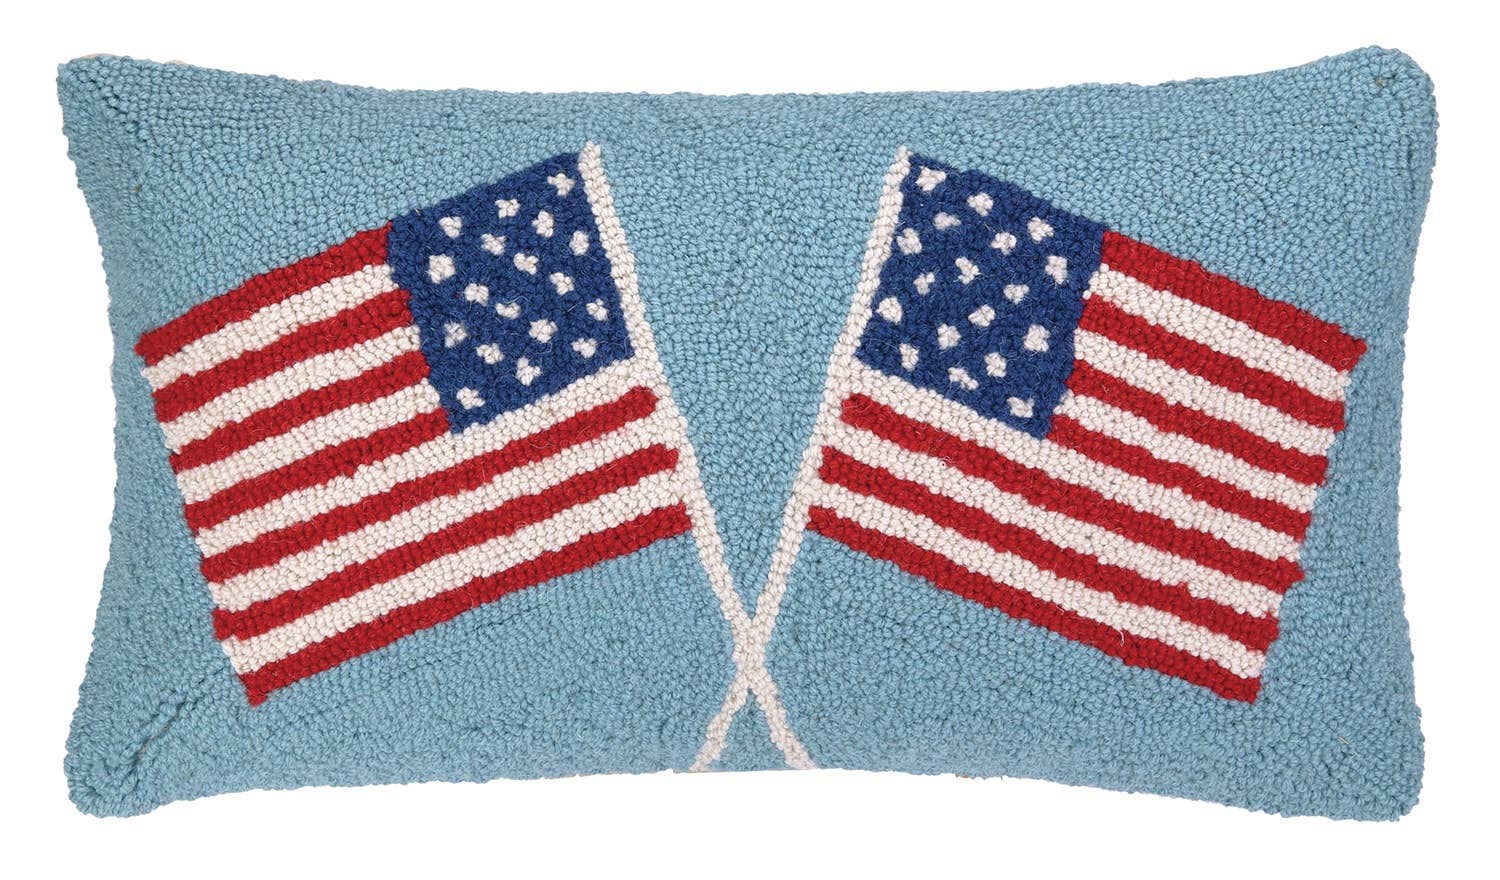 Double American Flags Hook Pillow - The Preppy Bunny